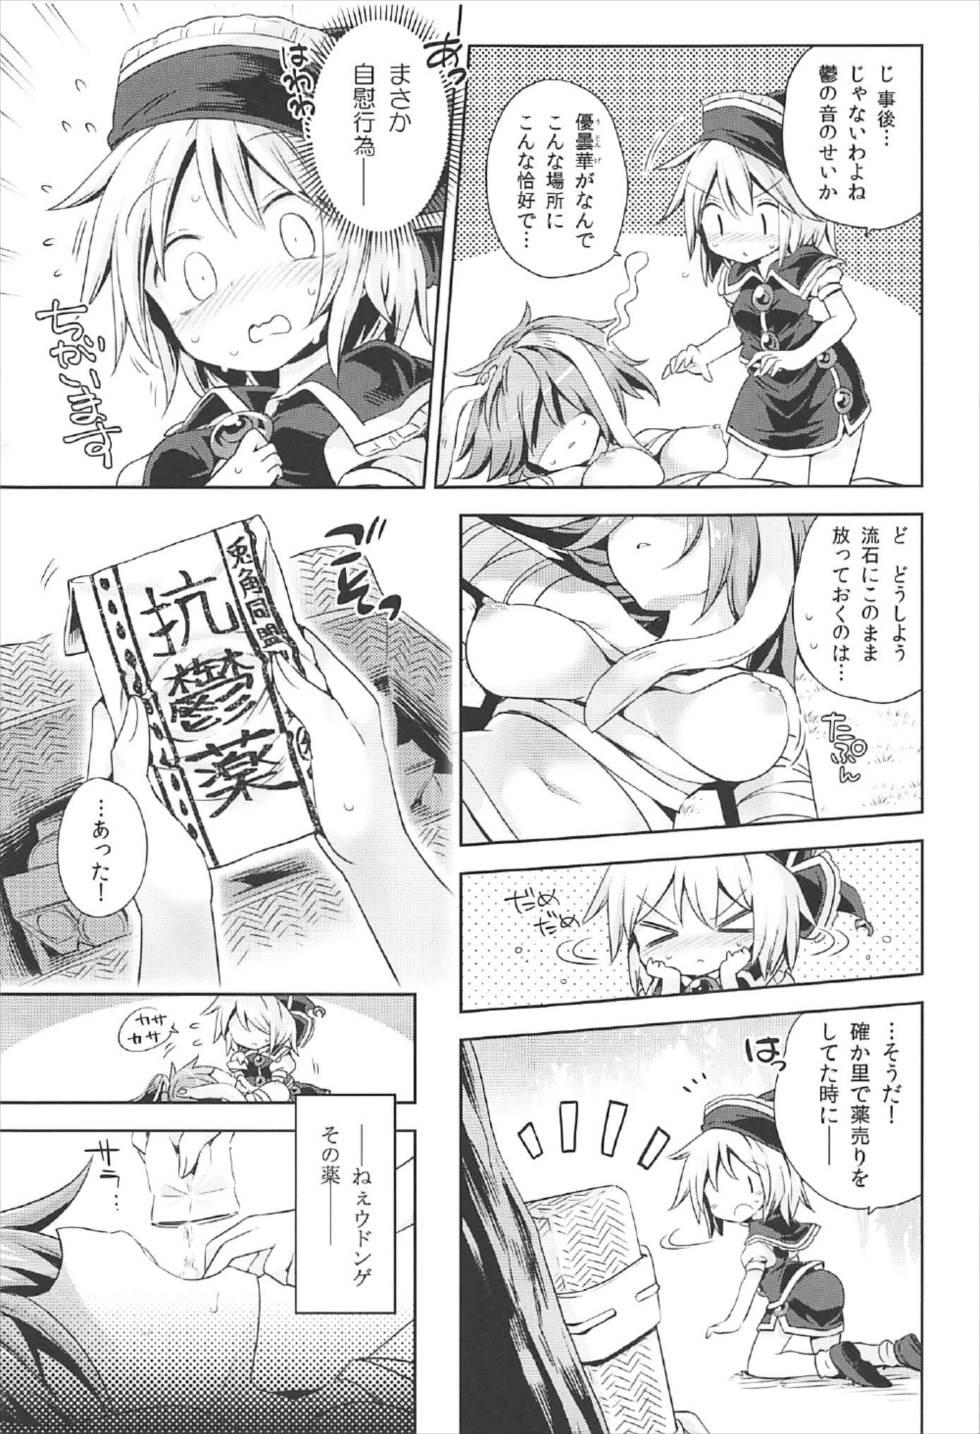 Dominant Kougou "Estro Tuning" - Touhou project Butts - Page 6